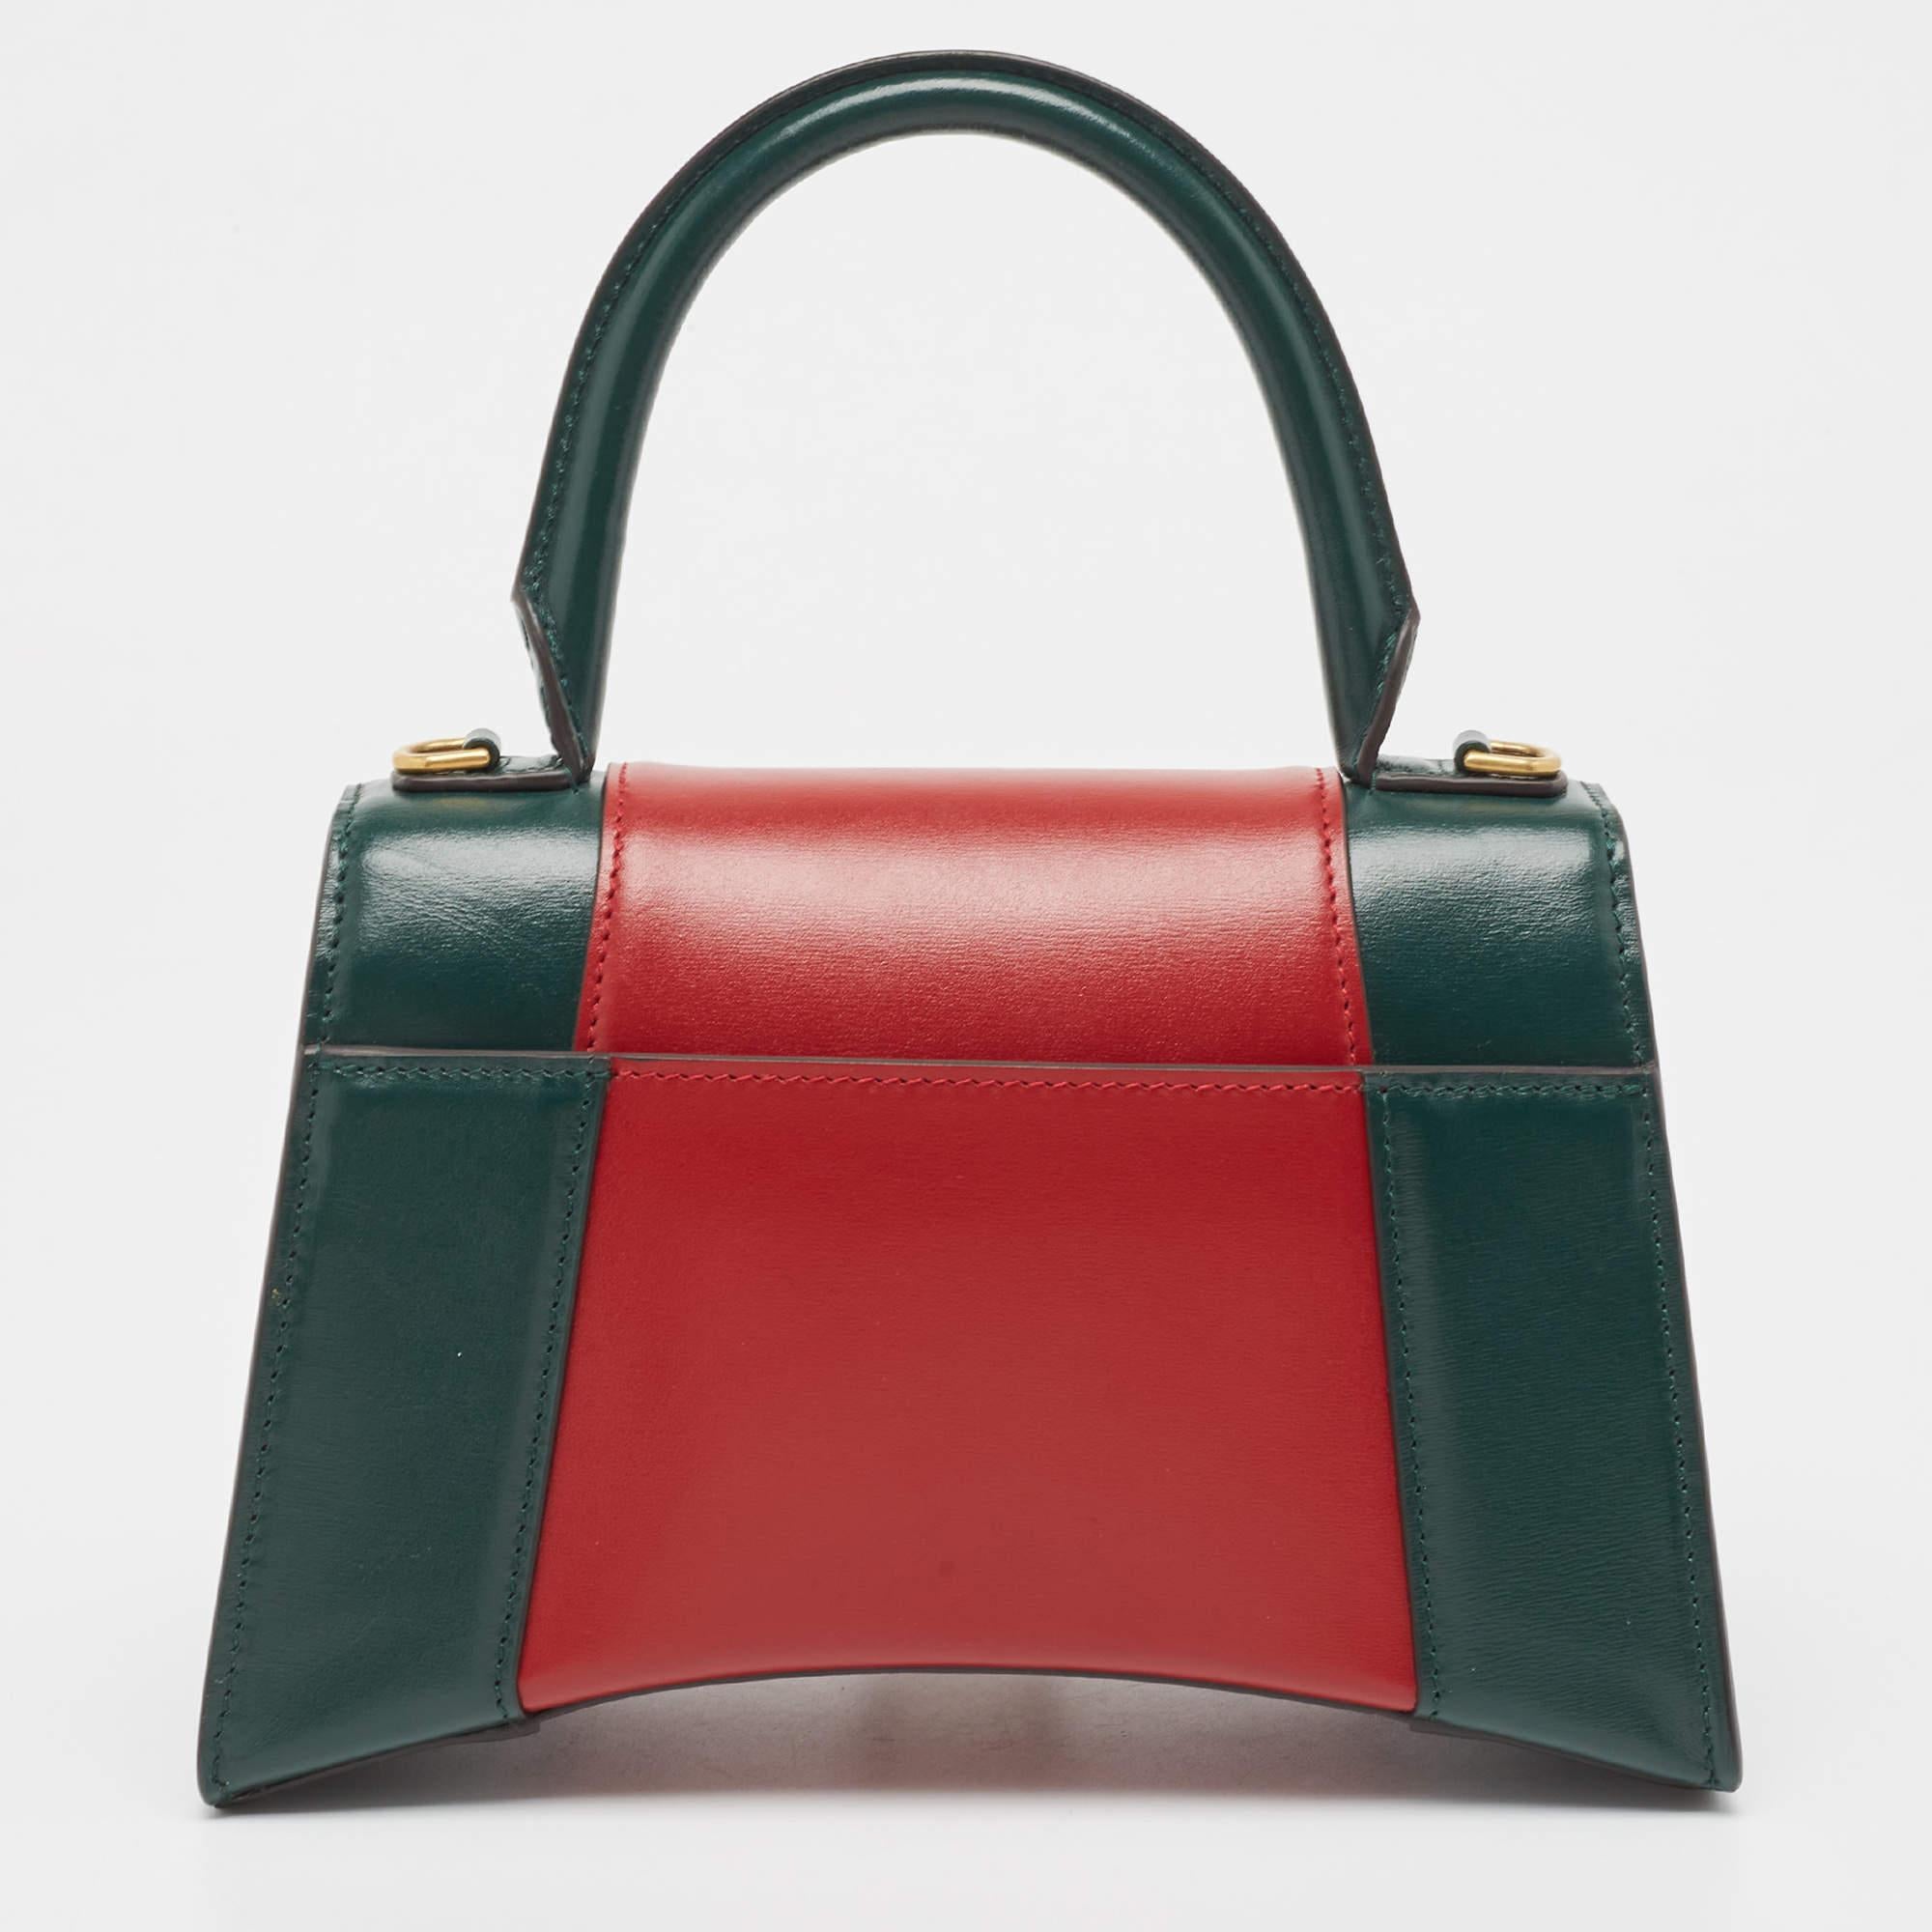 Balenciaga's Hourglass is inspired by the silhouettes of its sculptural blazers of the 1950s and, with its very distinctive shape, knows how to start a conversation. The curved bottom of this construction is beautifully paralleled with the foldover